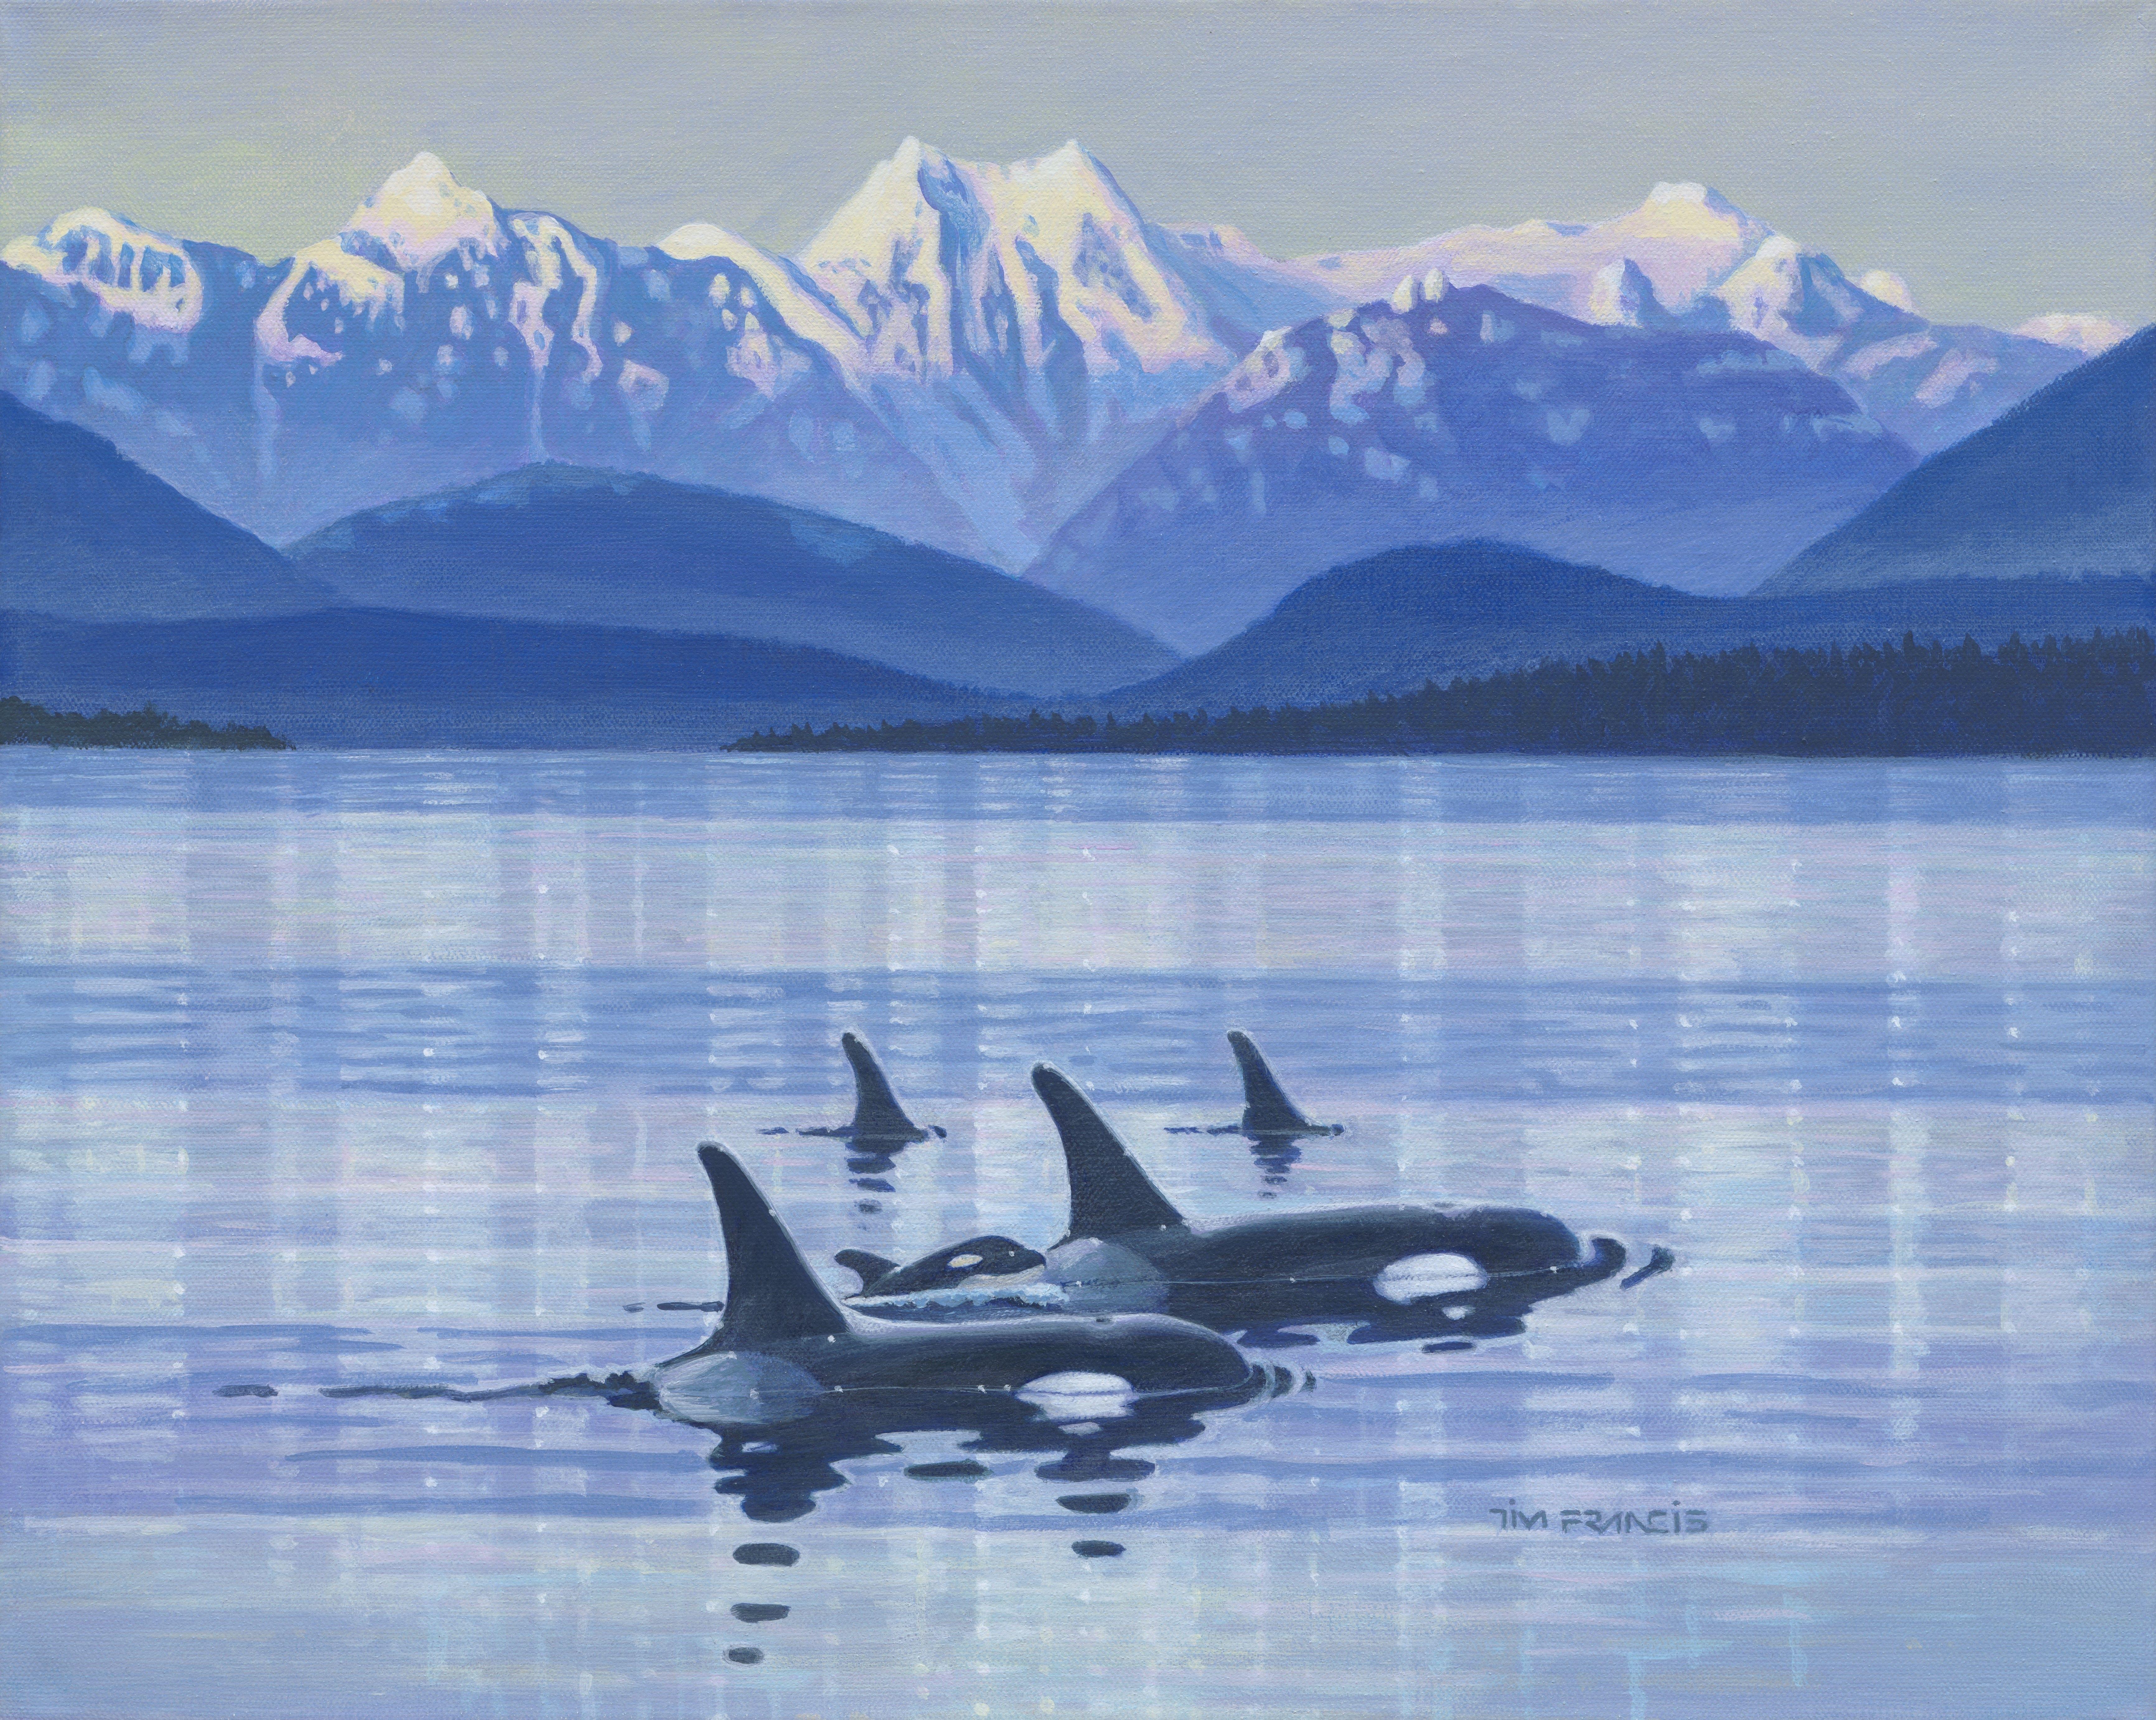 Five Orcas, including a calf, ply the waters of the Salish Sea. There are only seventy-three Orcas remaining in the Salish Sea and a baby is a are occurrence. :: Painting :: Realism :: This piece comes with an official certificate of authenticity